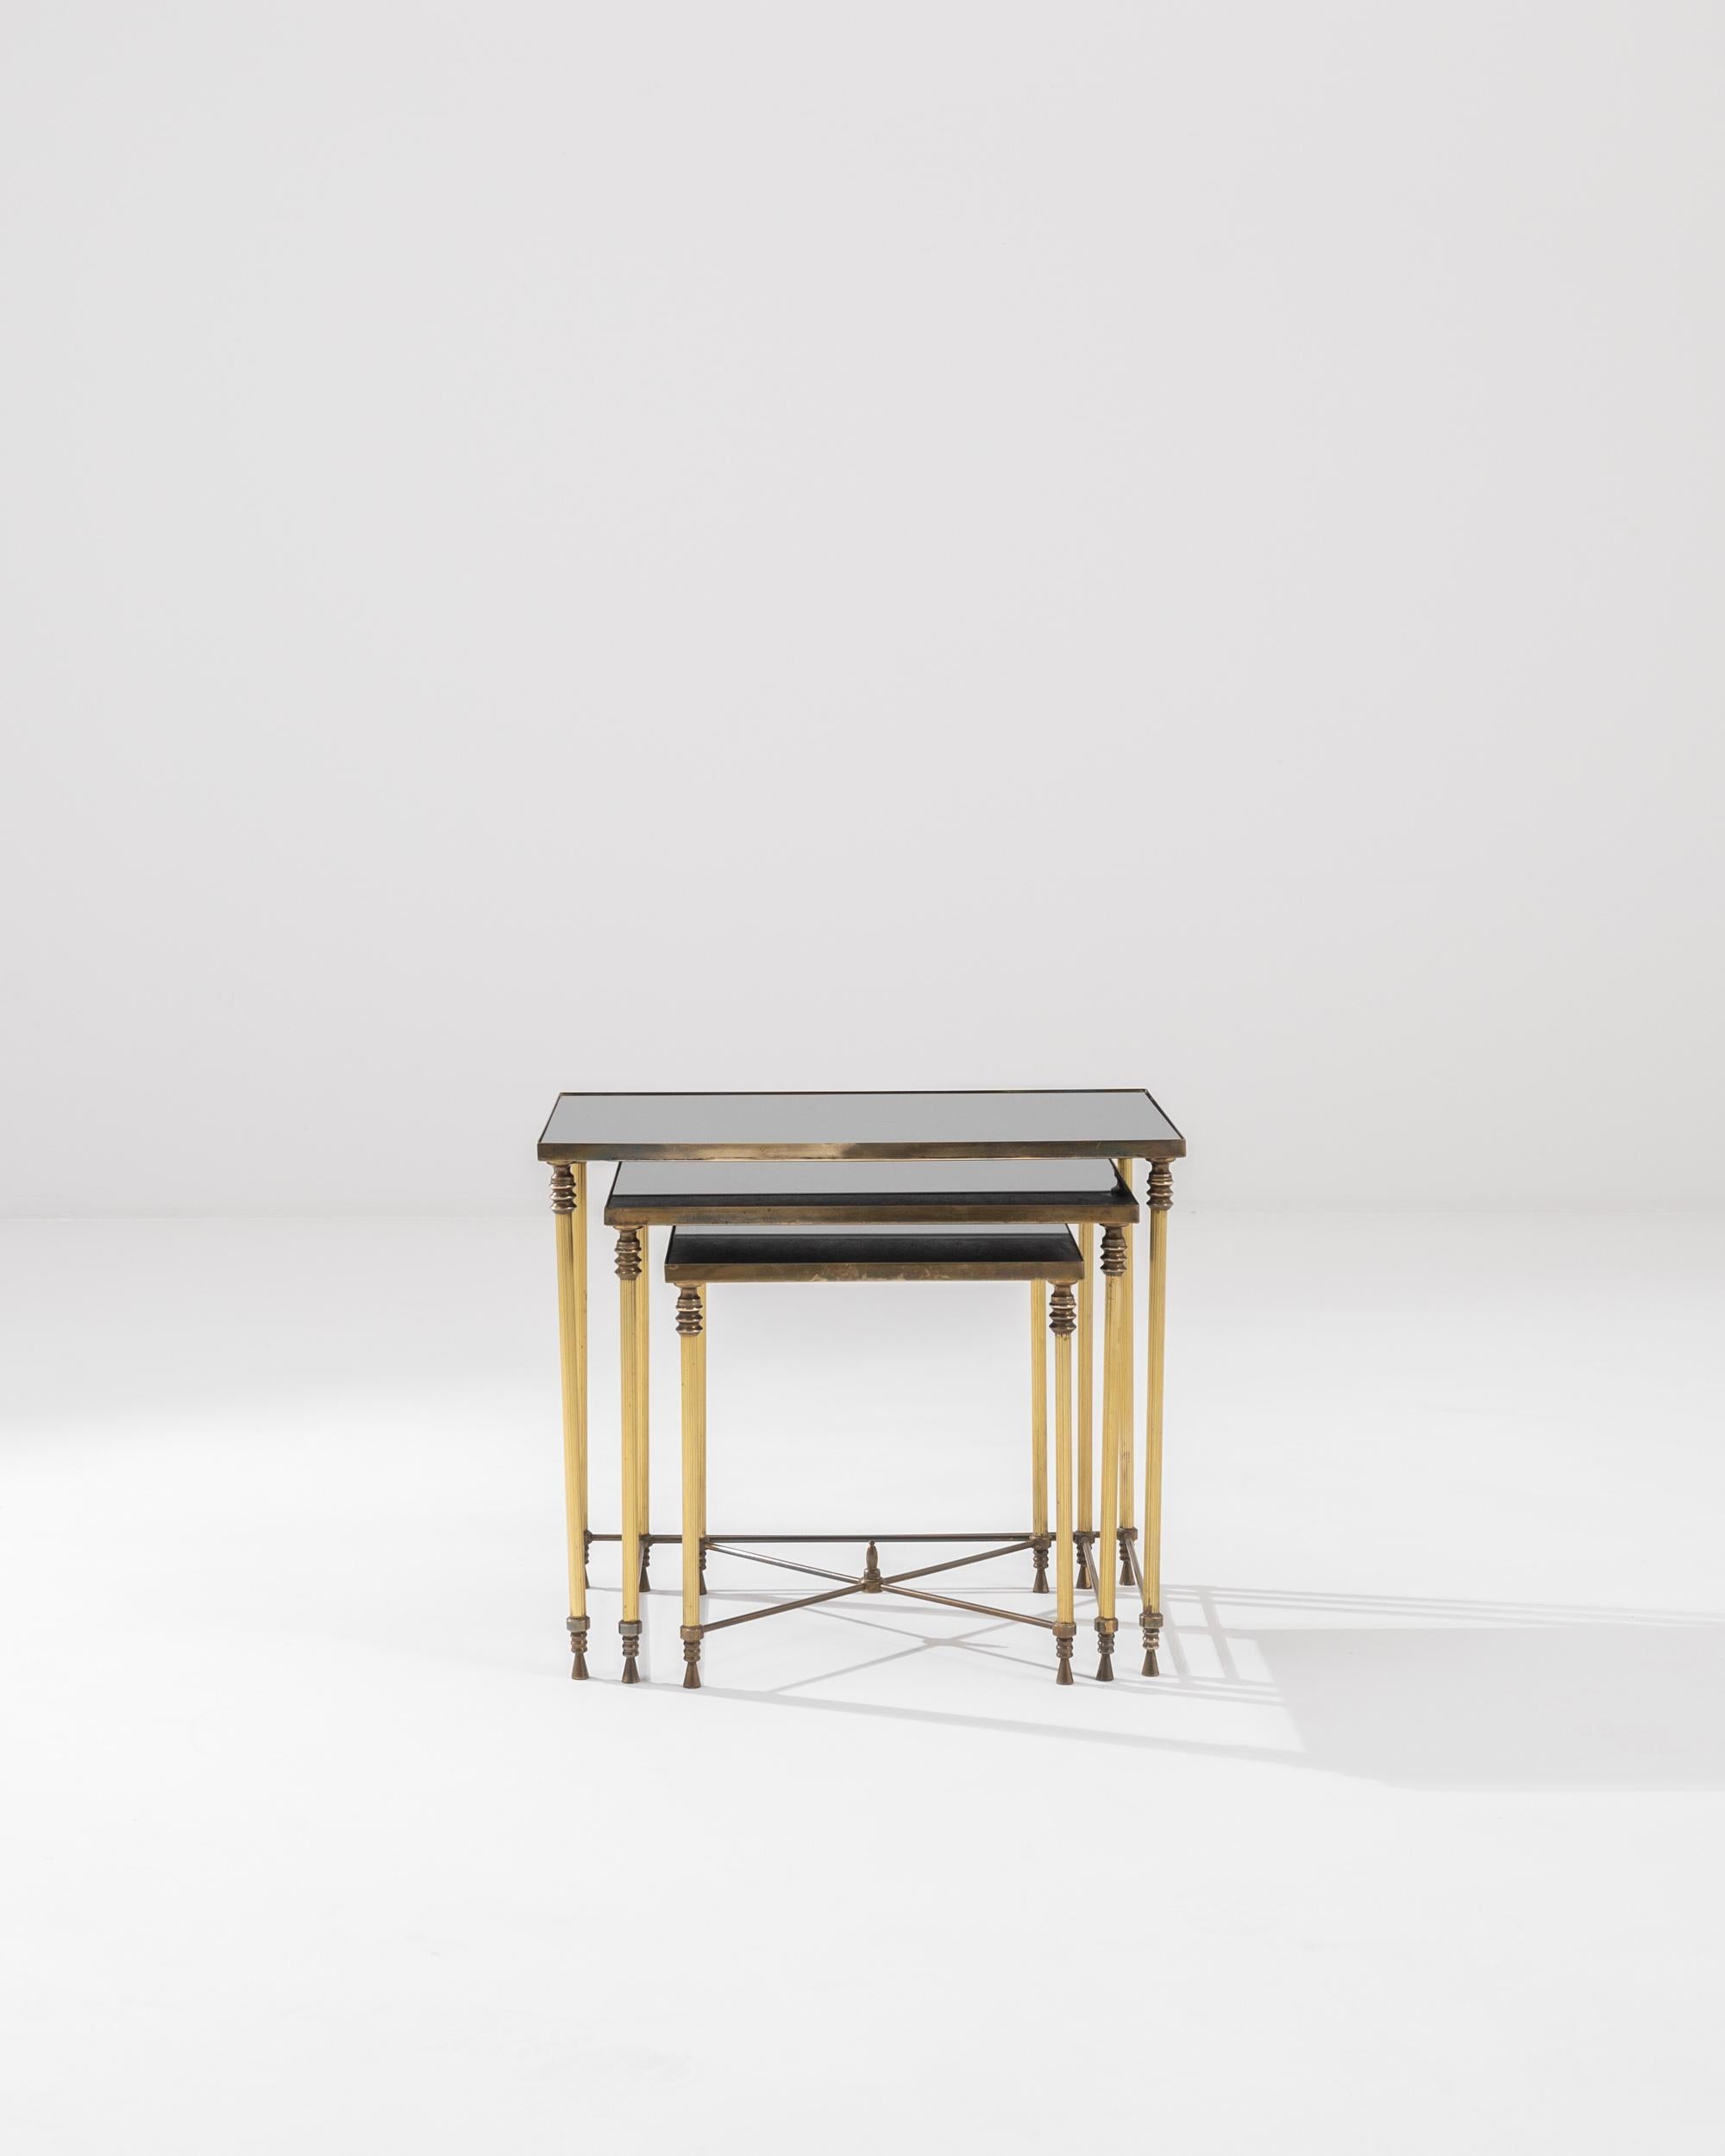 A set of metal nesting tables with glass tops from 20th century, France. Brass base, gold-colored legs, and darkly tinted glass form a pleasingly bright color palette. The patina that has spread across the metal indicates the mature age of these